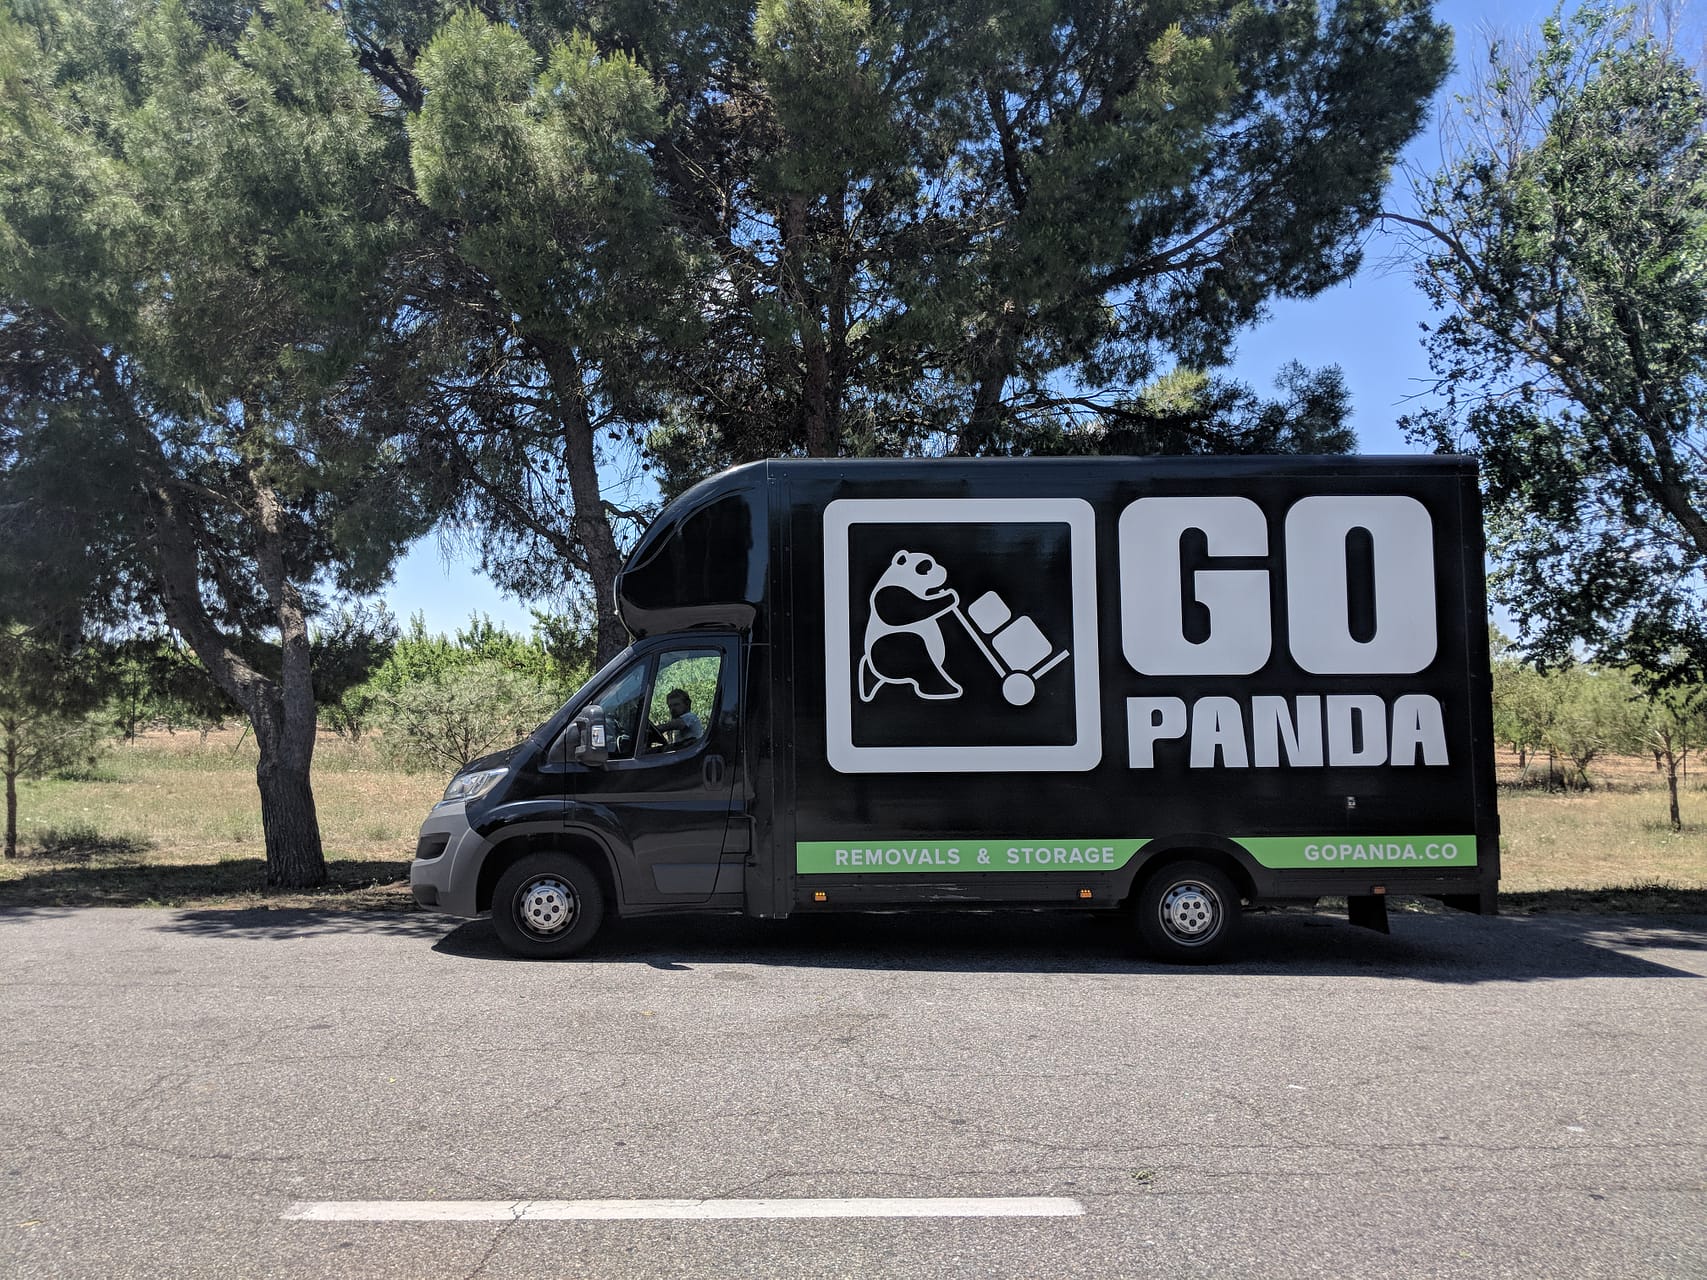 Moving abroad from the UK – Before and After Brexit Go Panda Removals